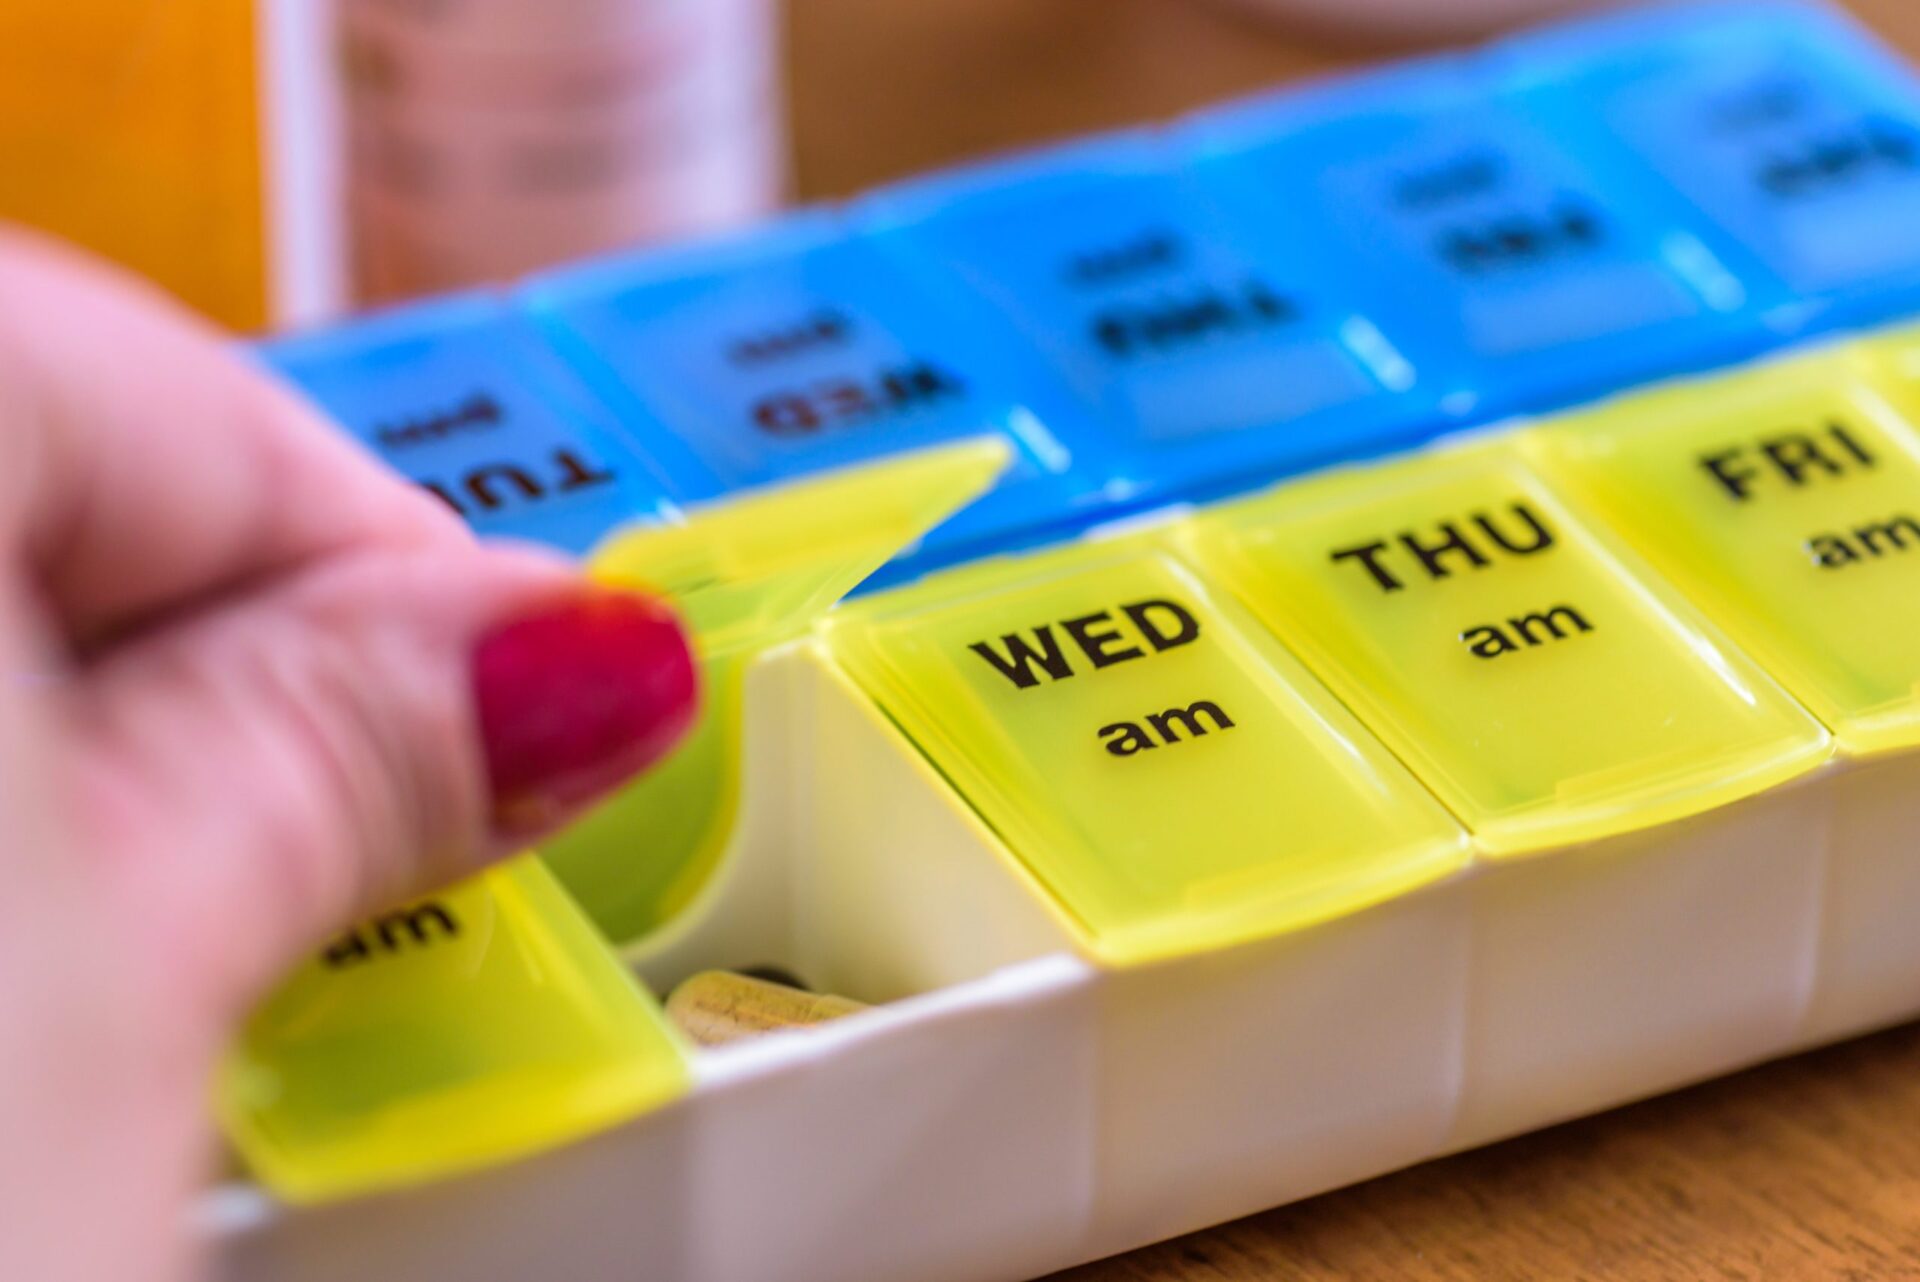 A hand opening the Tuesday morning compartment on a weekly pill organizer